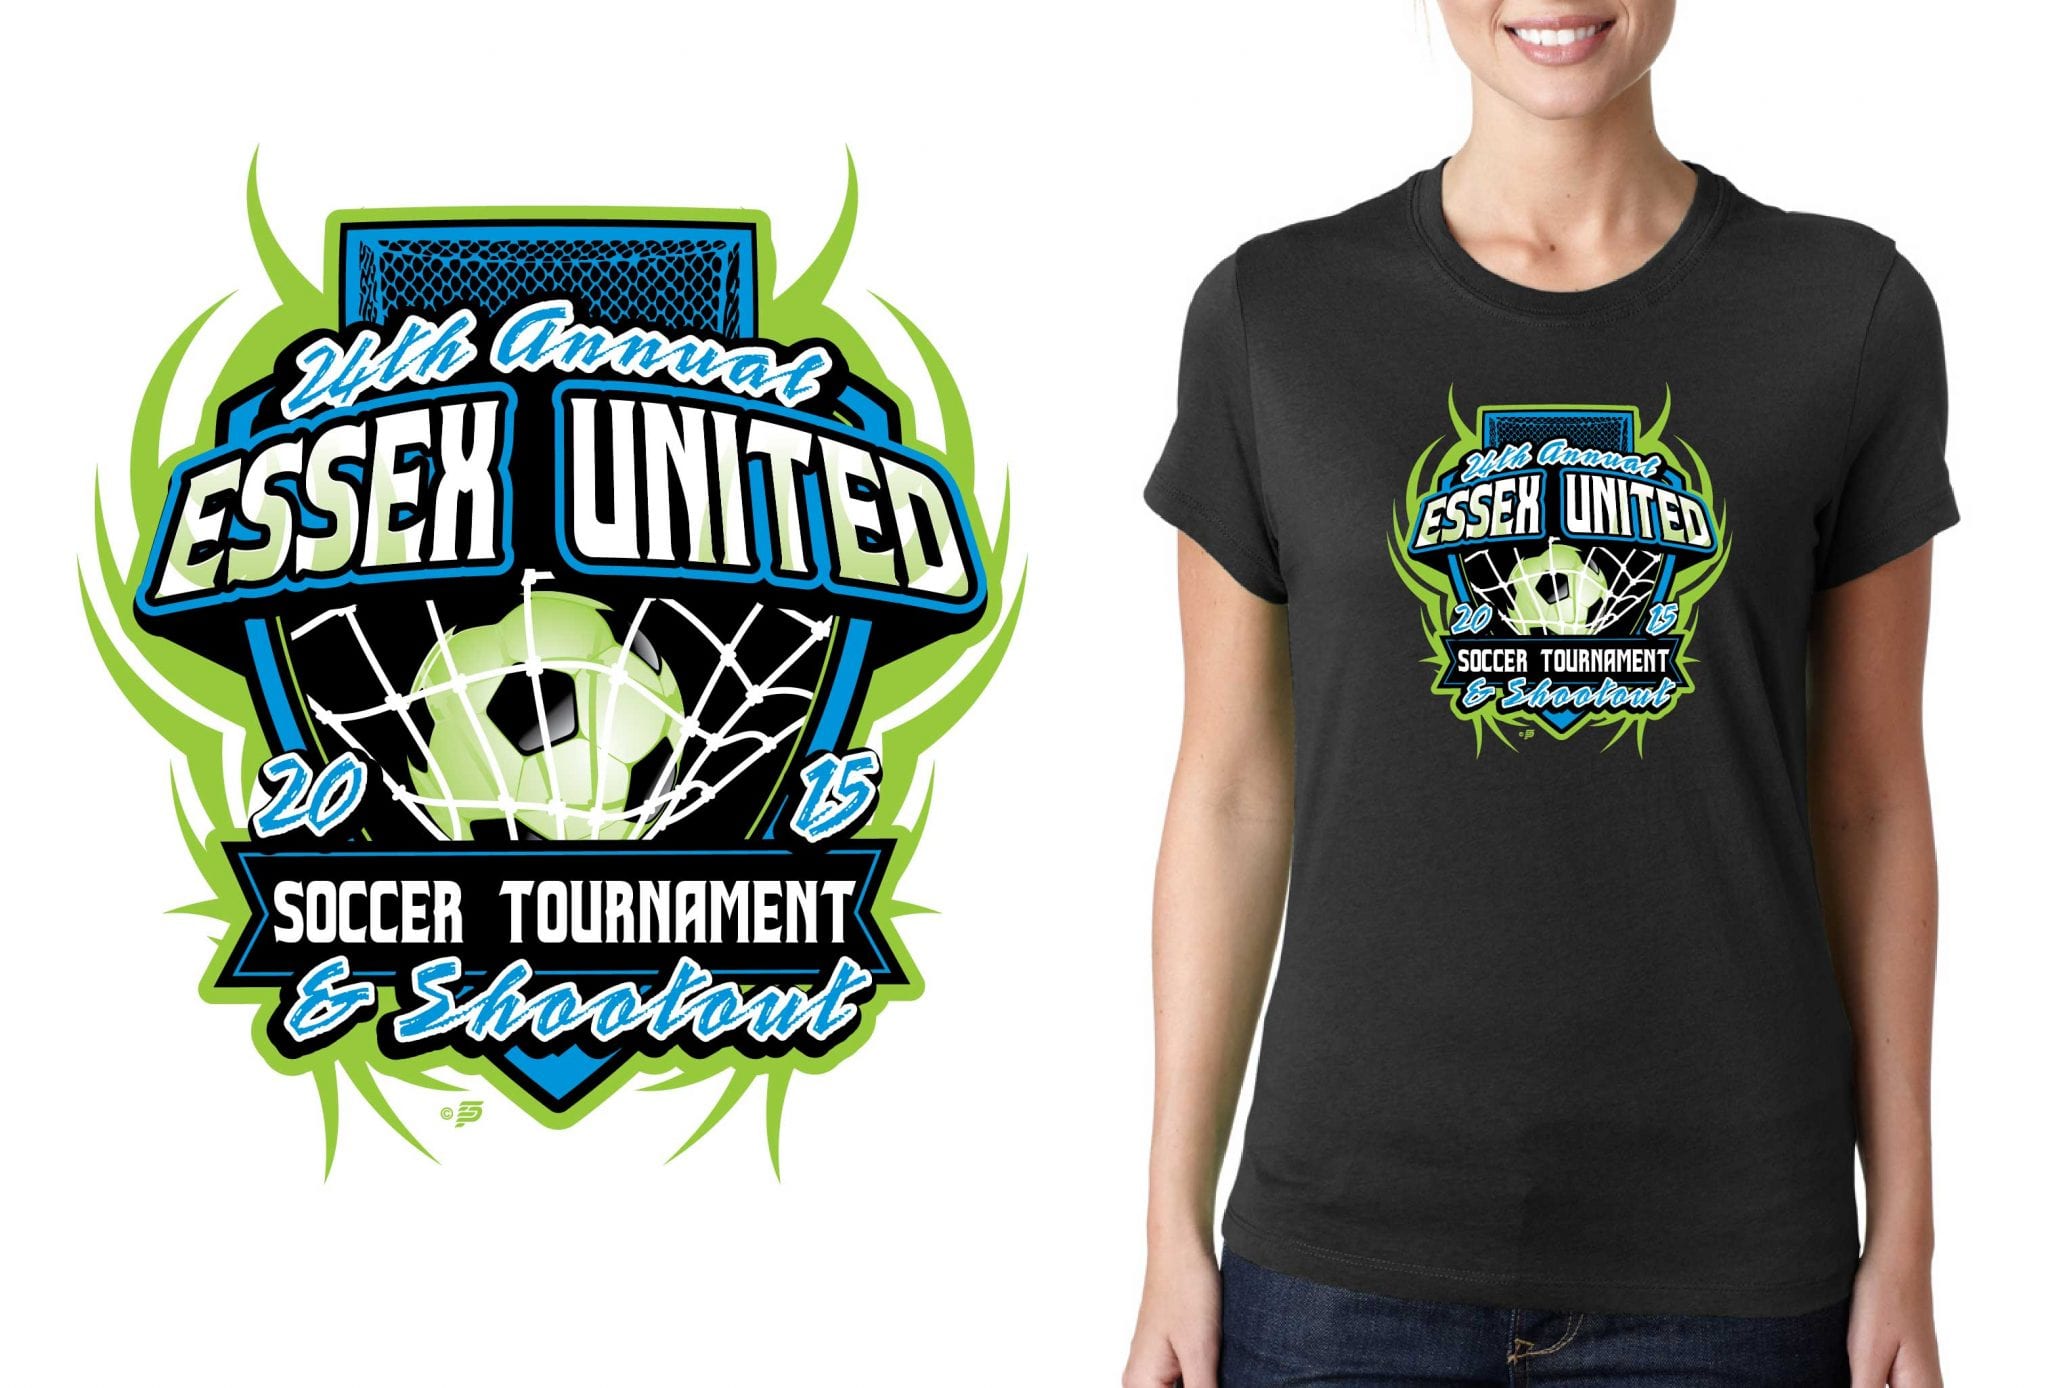 2015 24th Annual Essex United Soccer Tournament and Shootout Vector Logo design for T-Shirt